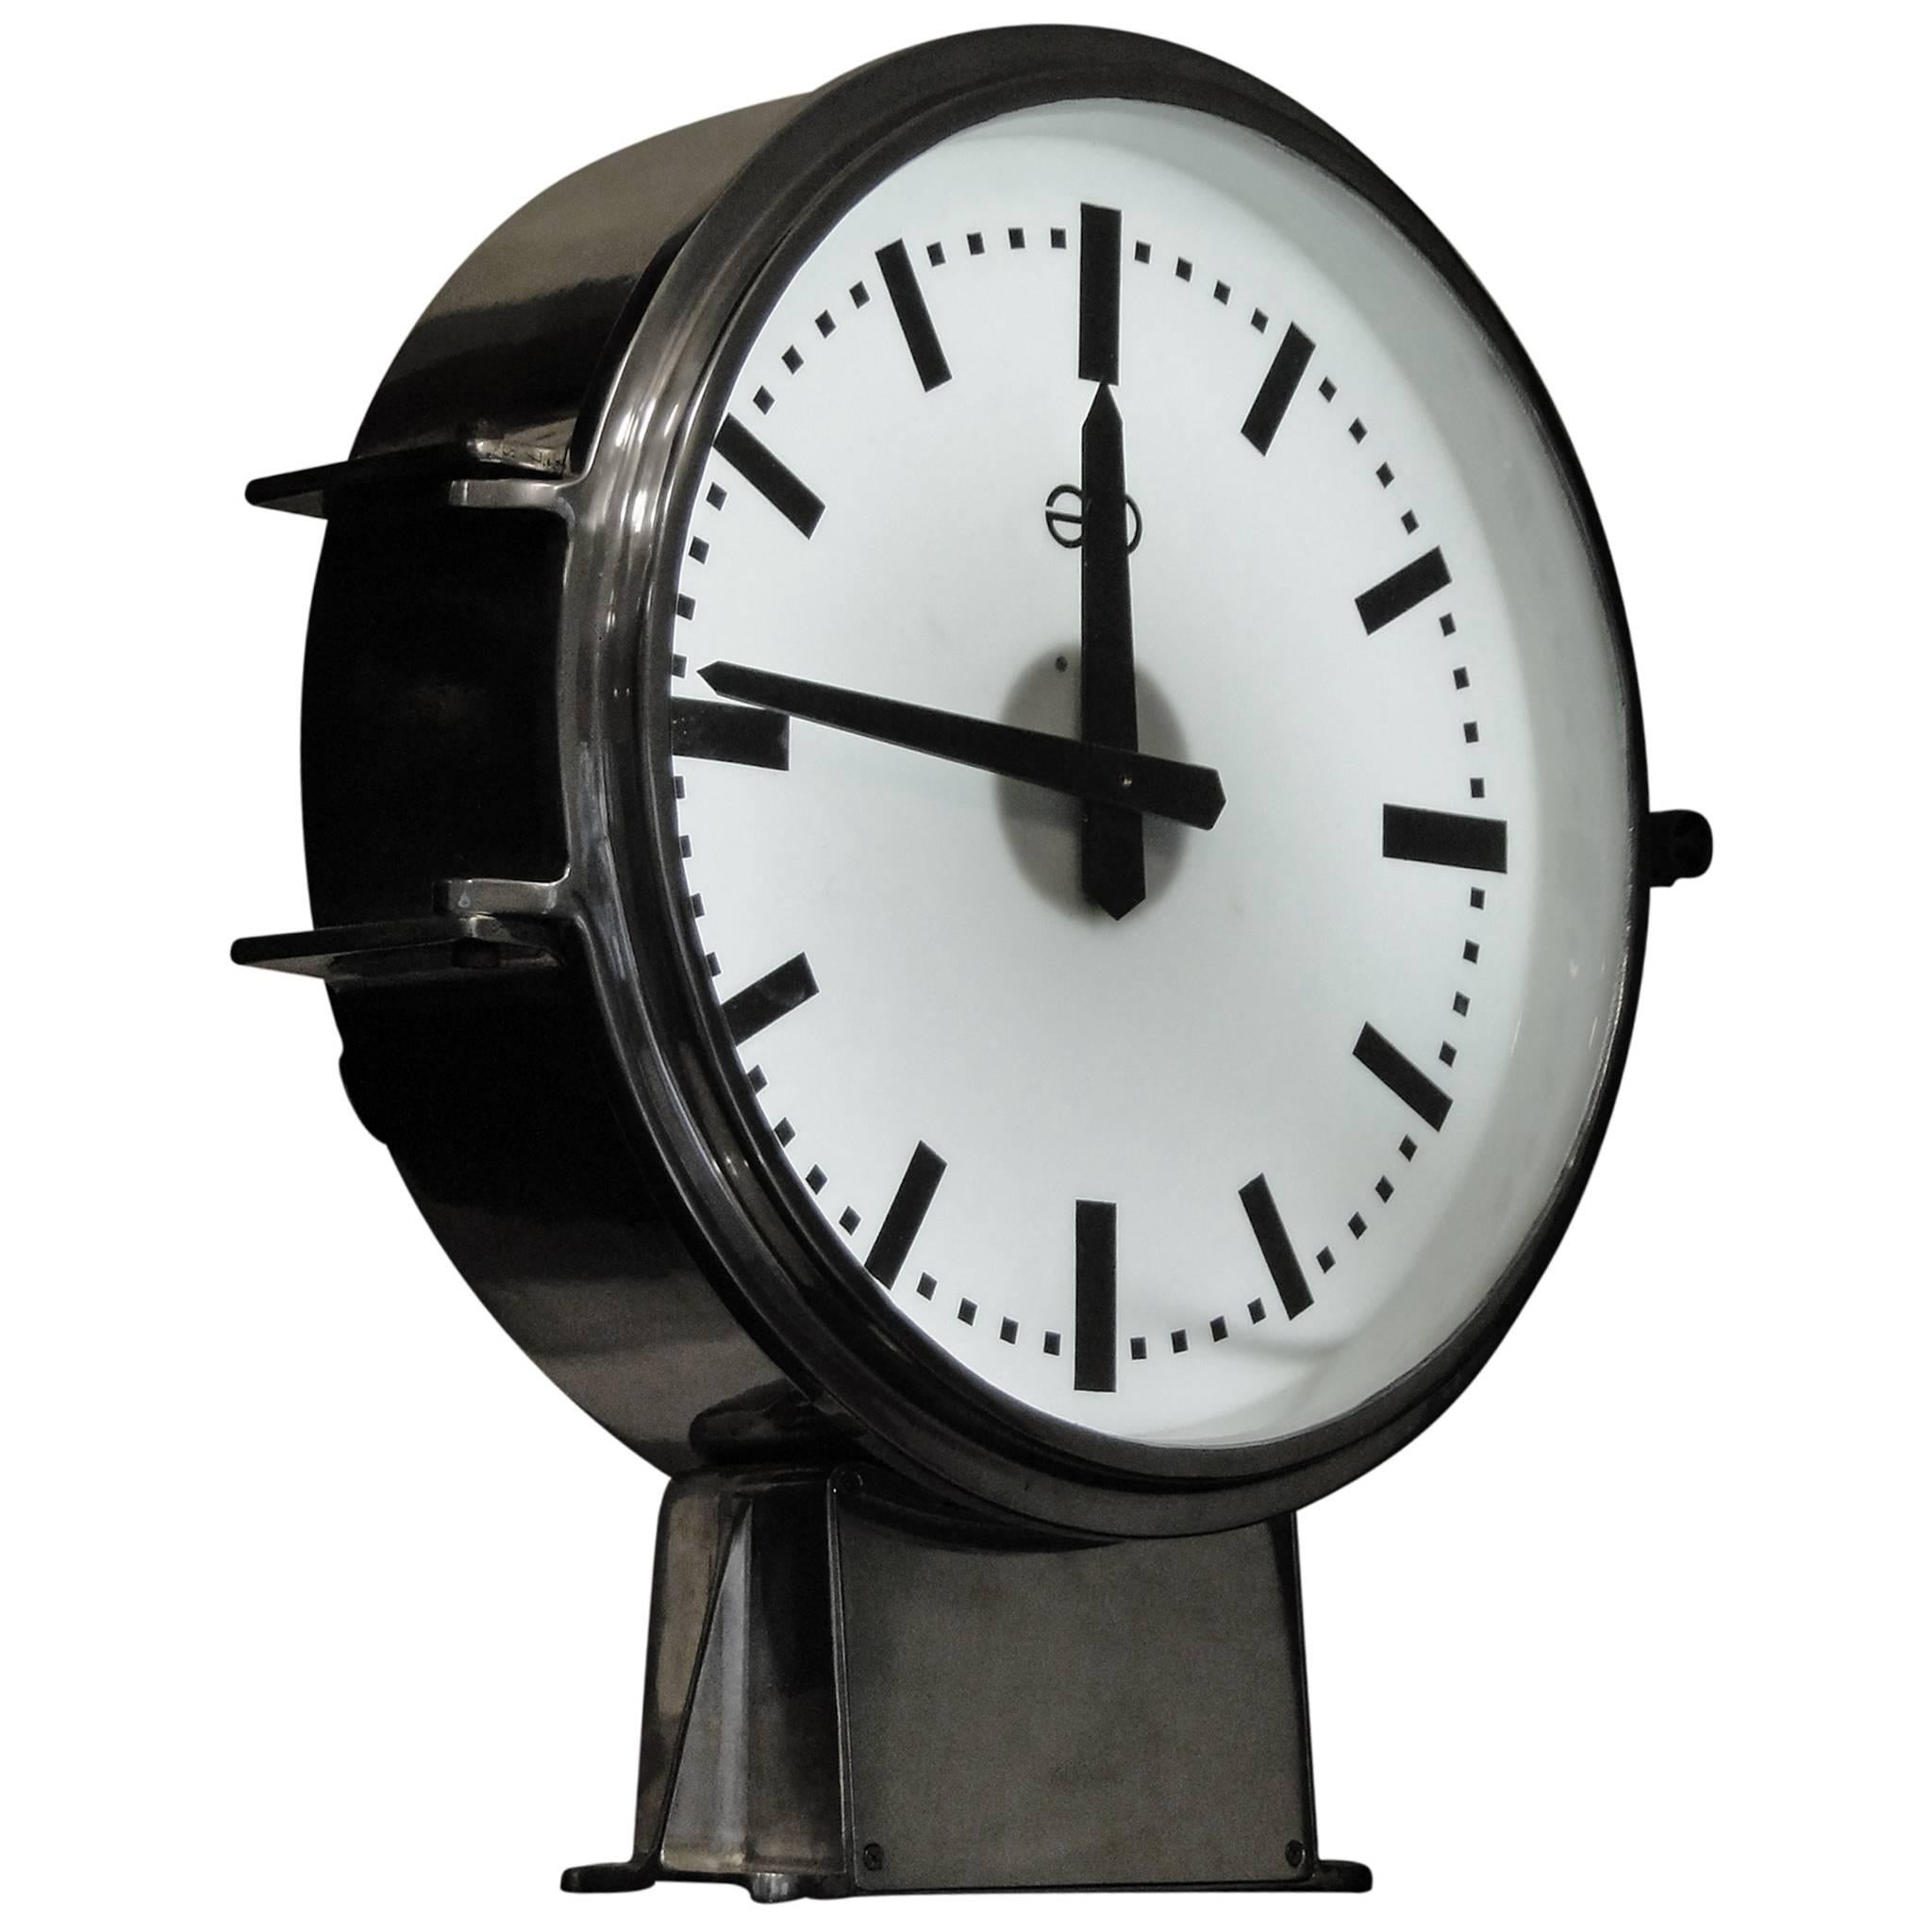 French Factory Ato Station Railway Clock Industrial